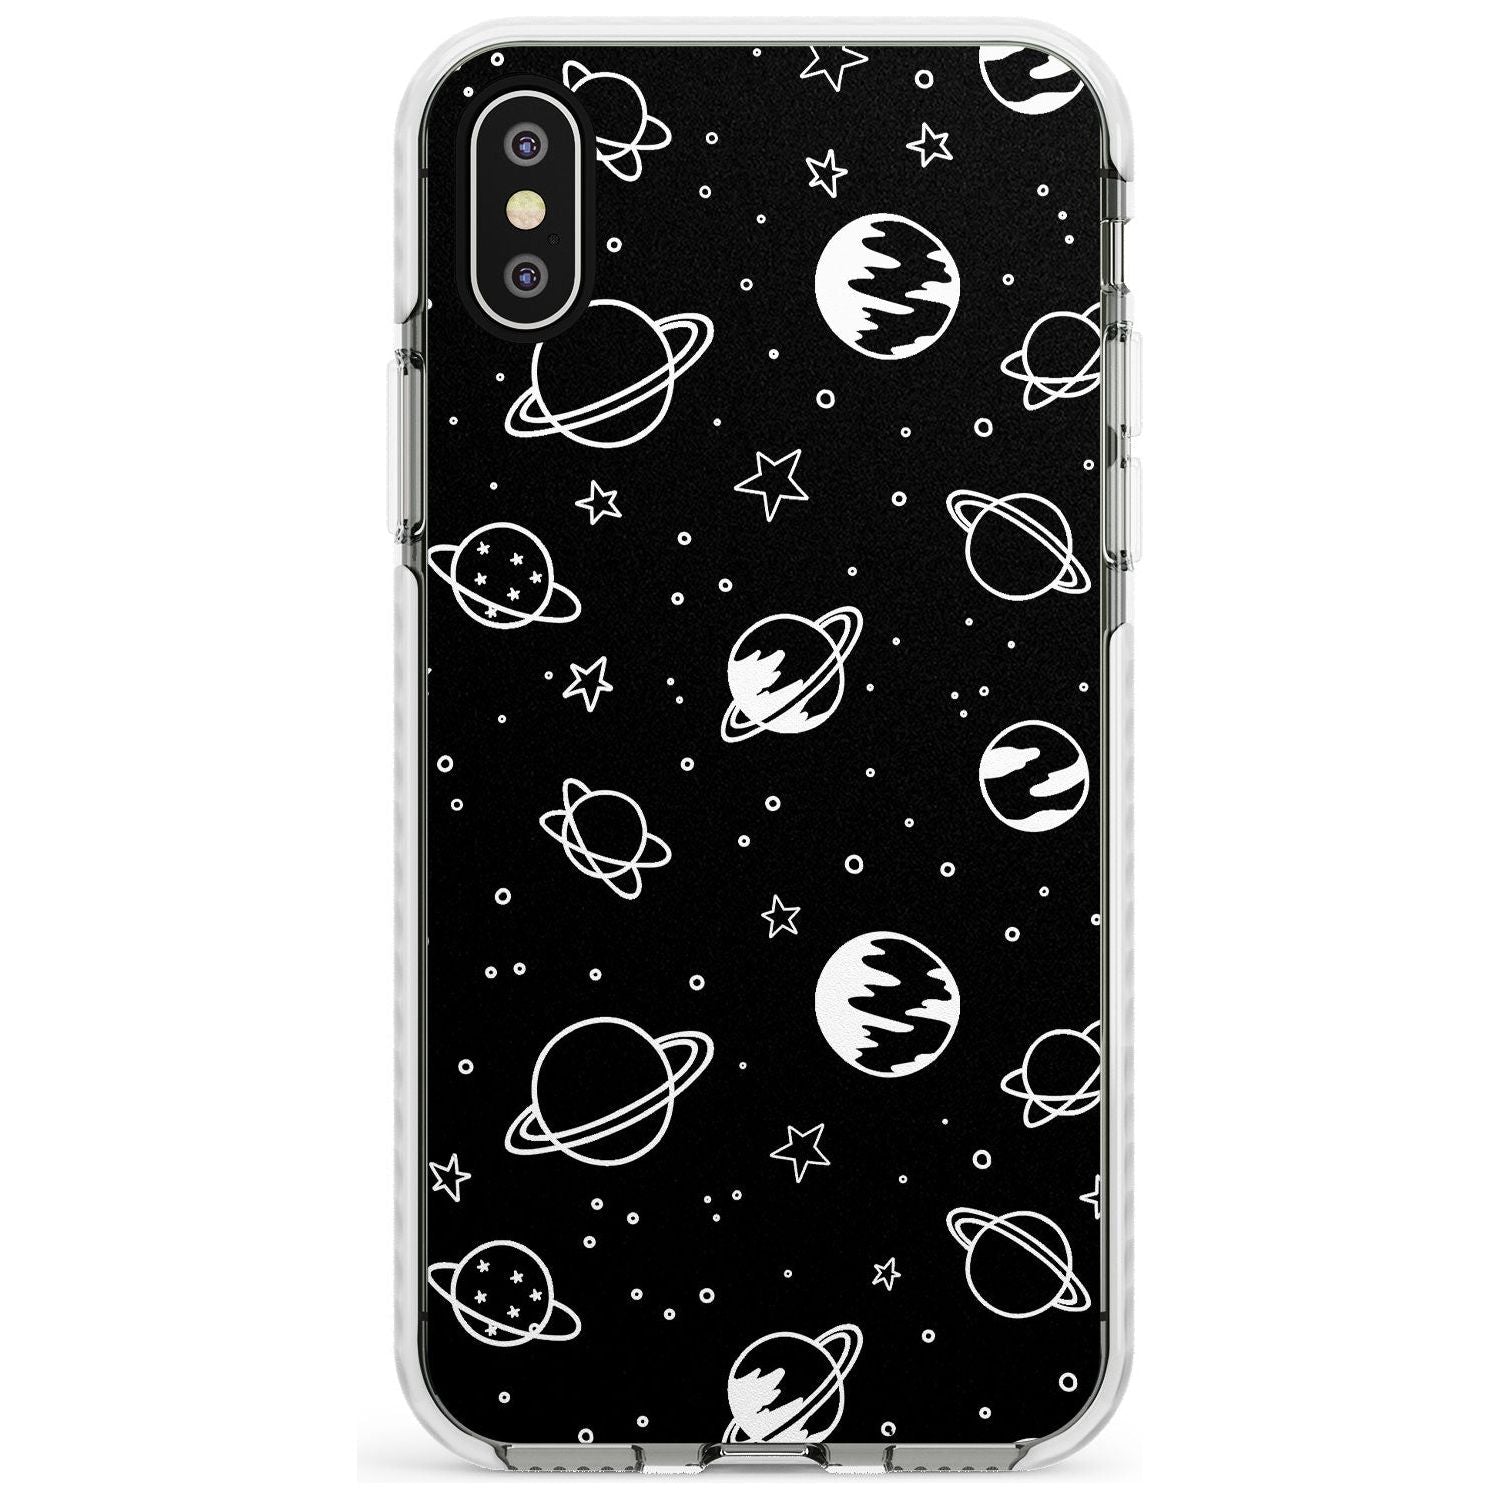 Outer Space Outlines: White on Black Slim TPU Phone Case Warehouse X XS Max XR